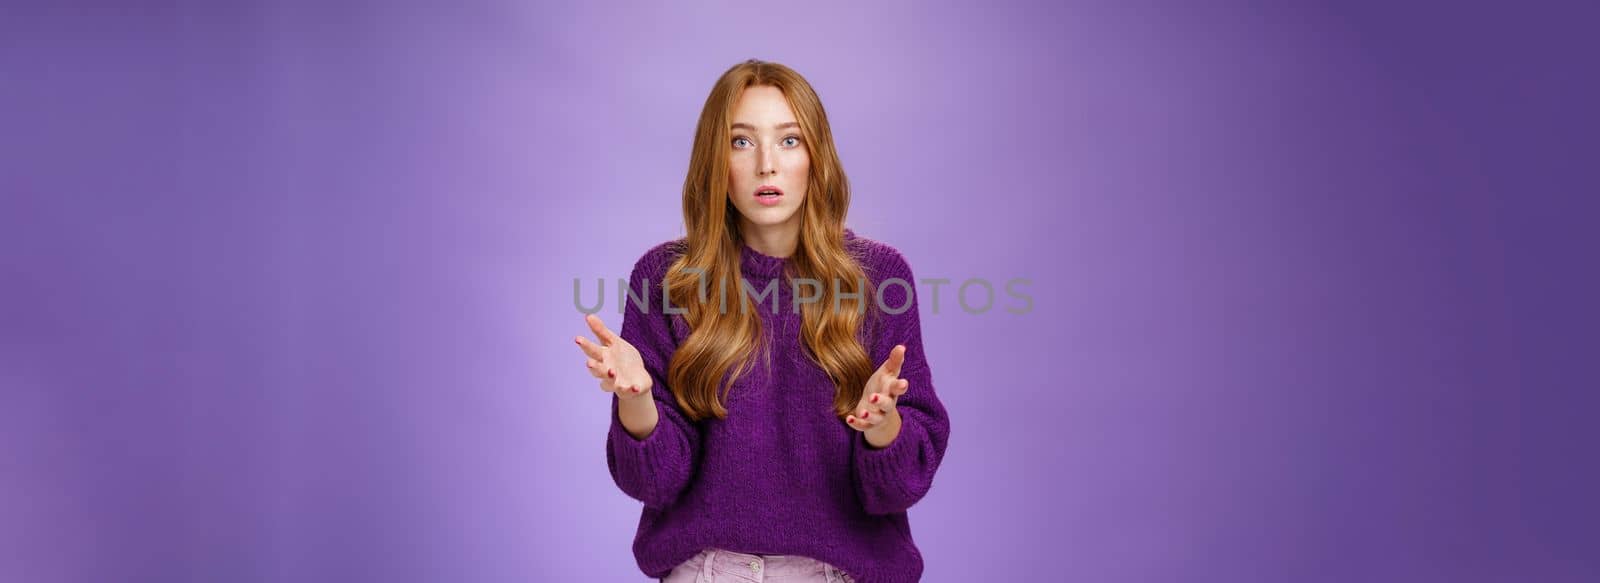 What wrong, I worried. Portrait of nervous and empathical young redhead woman feeling anxious raising hands questioned and looking at camera wondered expressing concern for friend over purple wall.